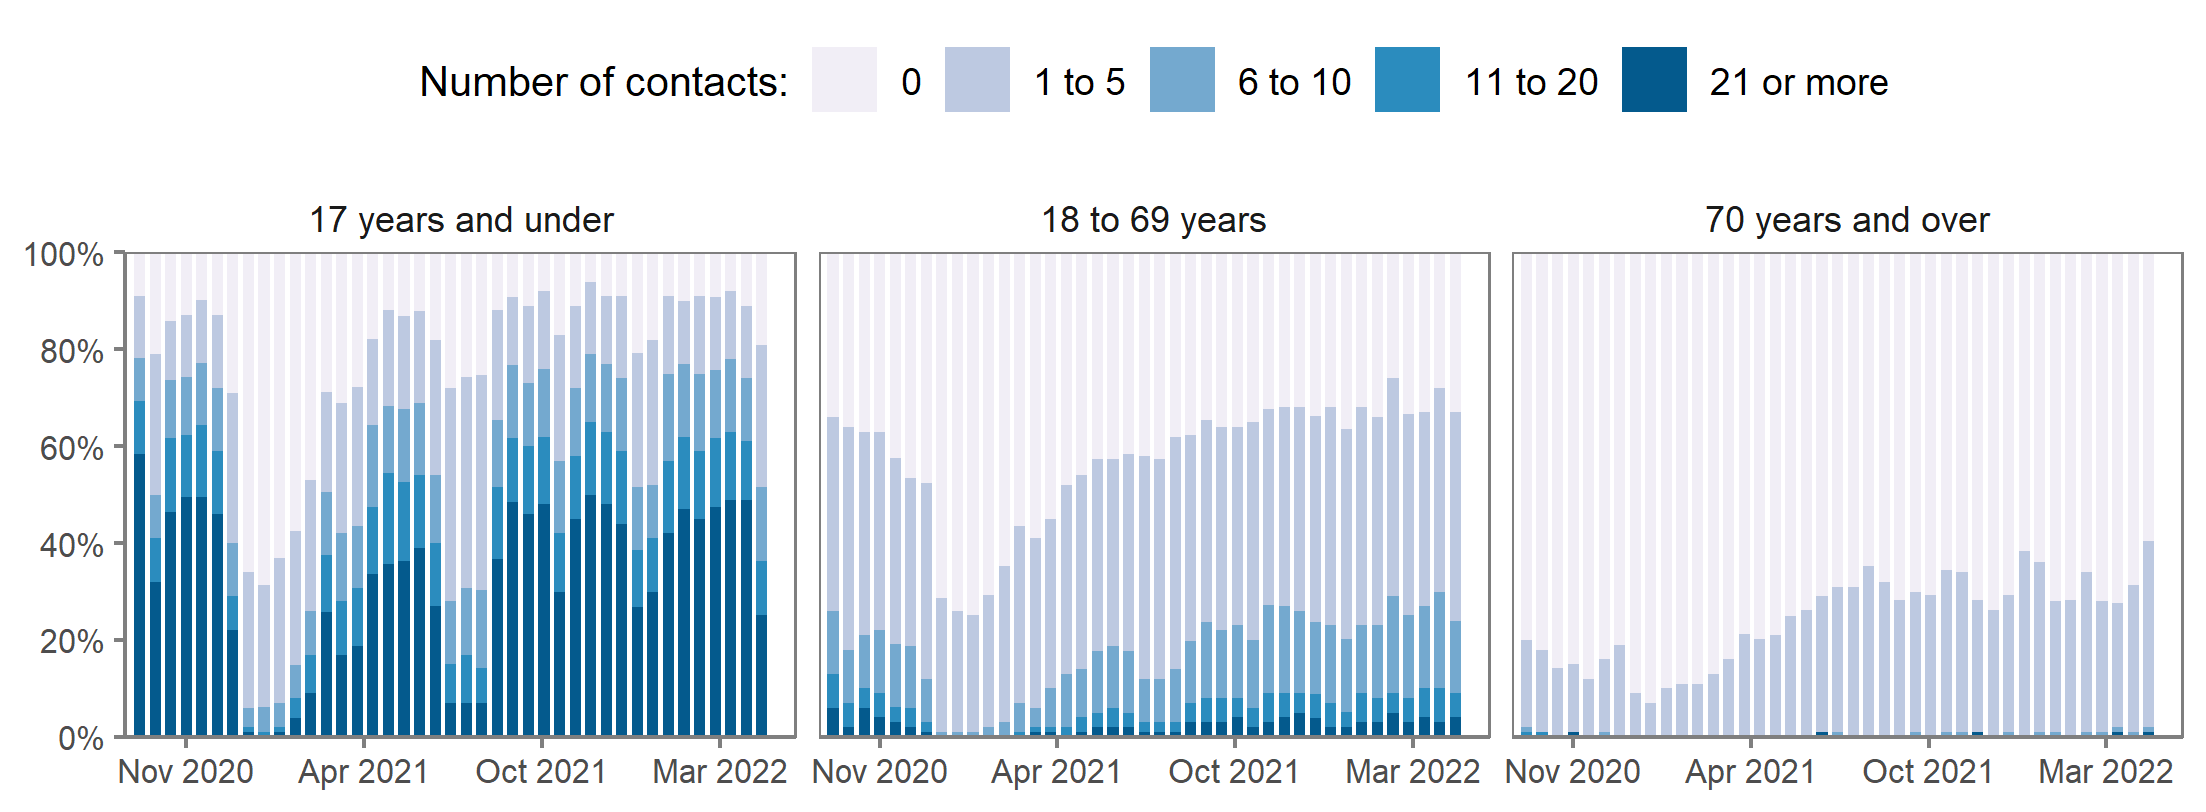 This chart shows the proportions of school-age children reporting each category of number of physical contacts (0, 1 to 5, 6 to 10, 11 to 20, and 21 or more contacts).  Trends in the contacts of children vary over time and are likely to be primarily driven by the timing of school holidays.